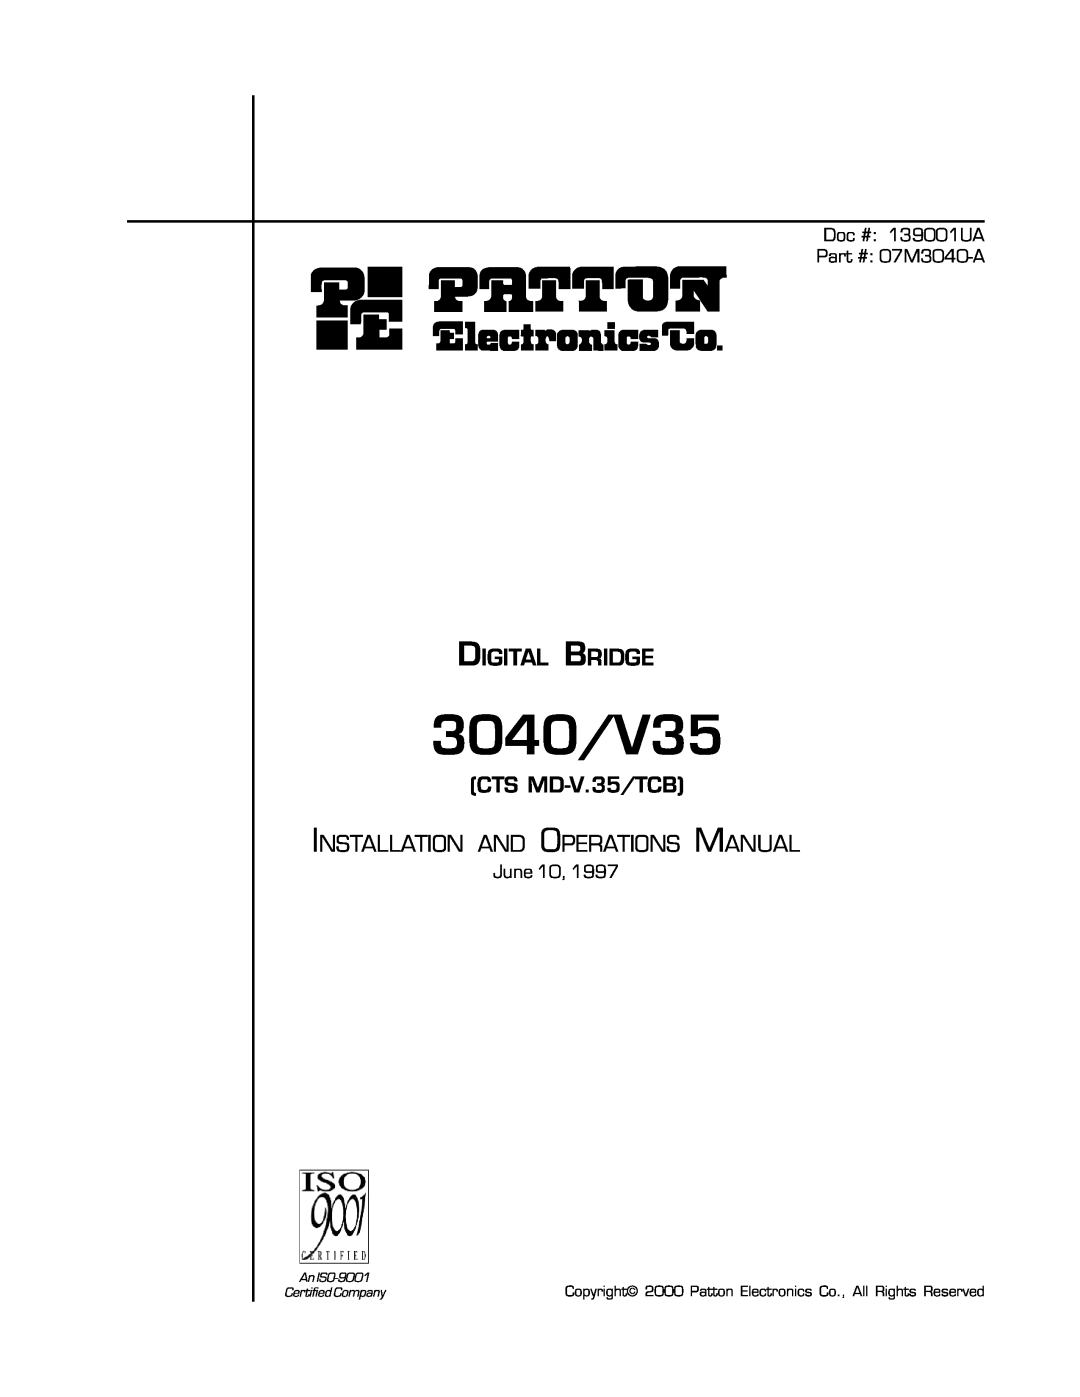 Patton electronic 3040/V35 manual CTS MD-V.35/TCB, Copyright 2000 Patton Electronics Co., All Rights Reserved, An ISO-9001 